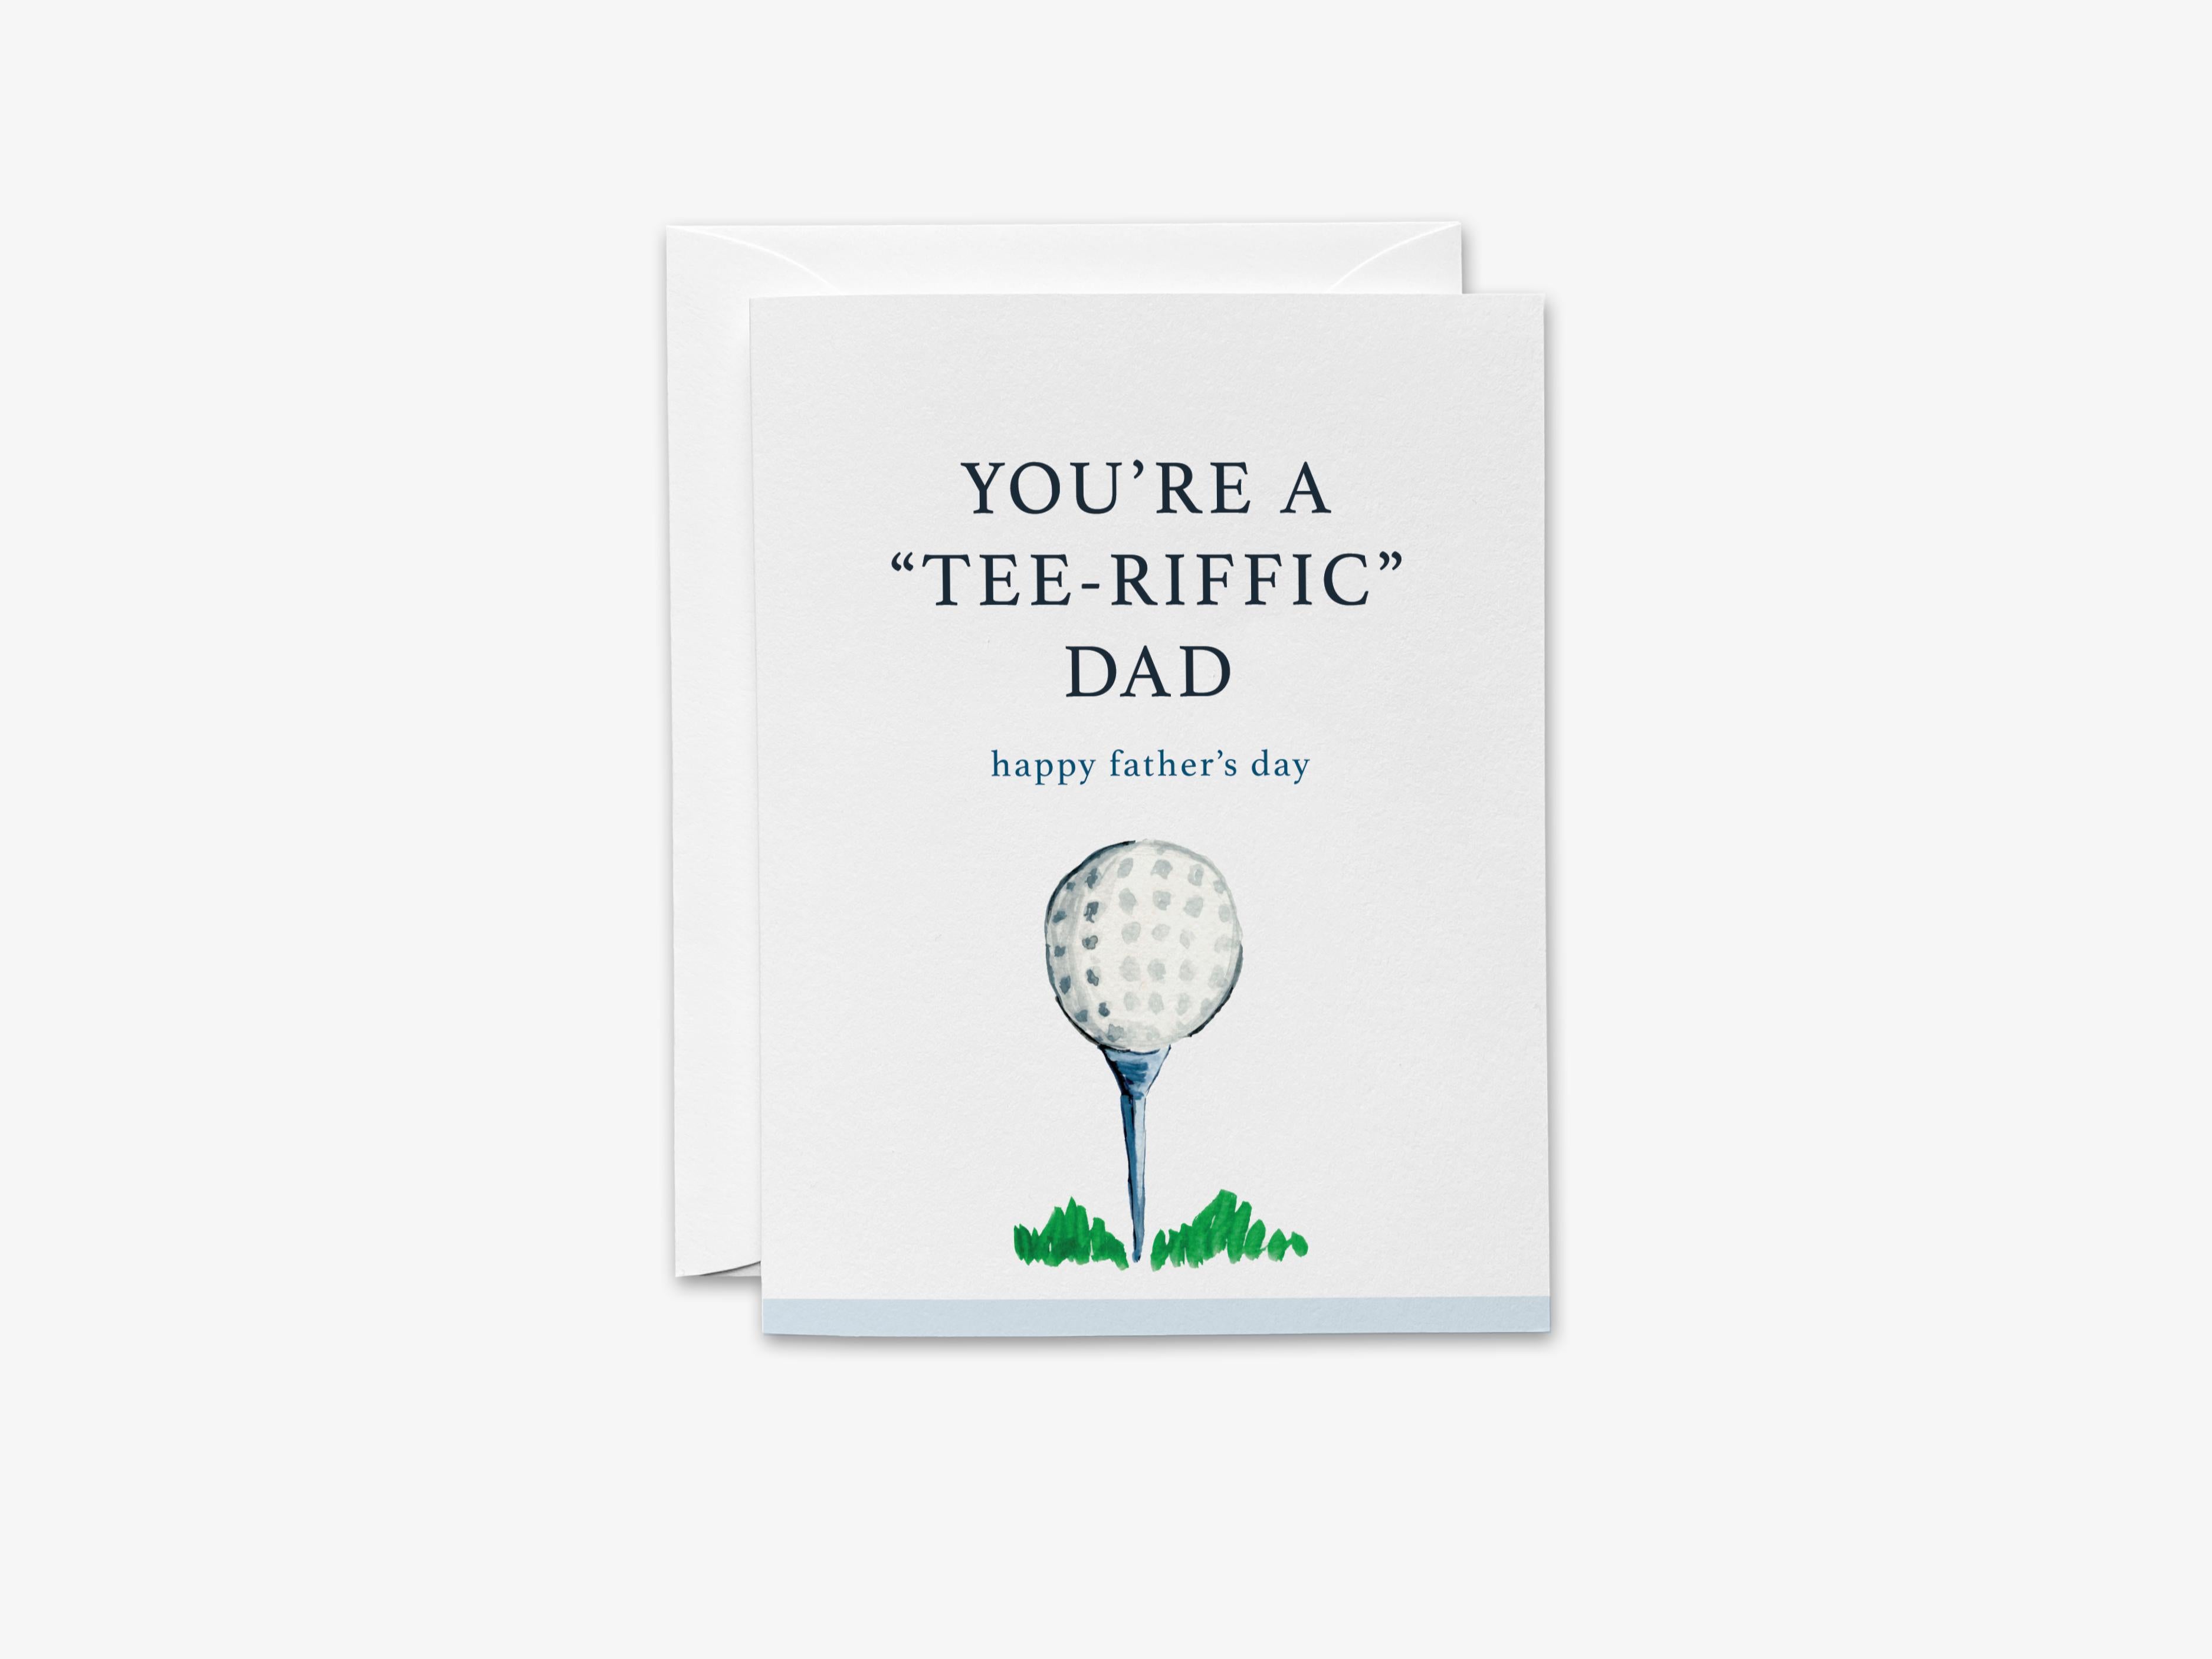 You're A Tee-Riffic Dad Father's Day Golf Card-These folded greeting cards are 4.25x5.5 and feature our hand-painted golf ball, printed in the USA on 100lb textured stock. They come with a White envelope and make a great Father's Day card for the golf loving dad in your life.-The Singing Little Bird